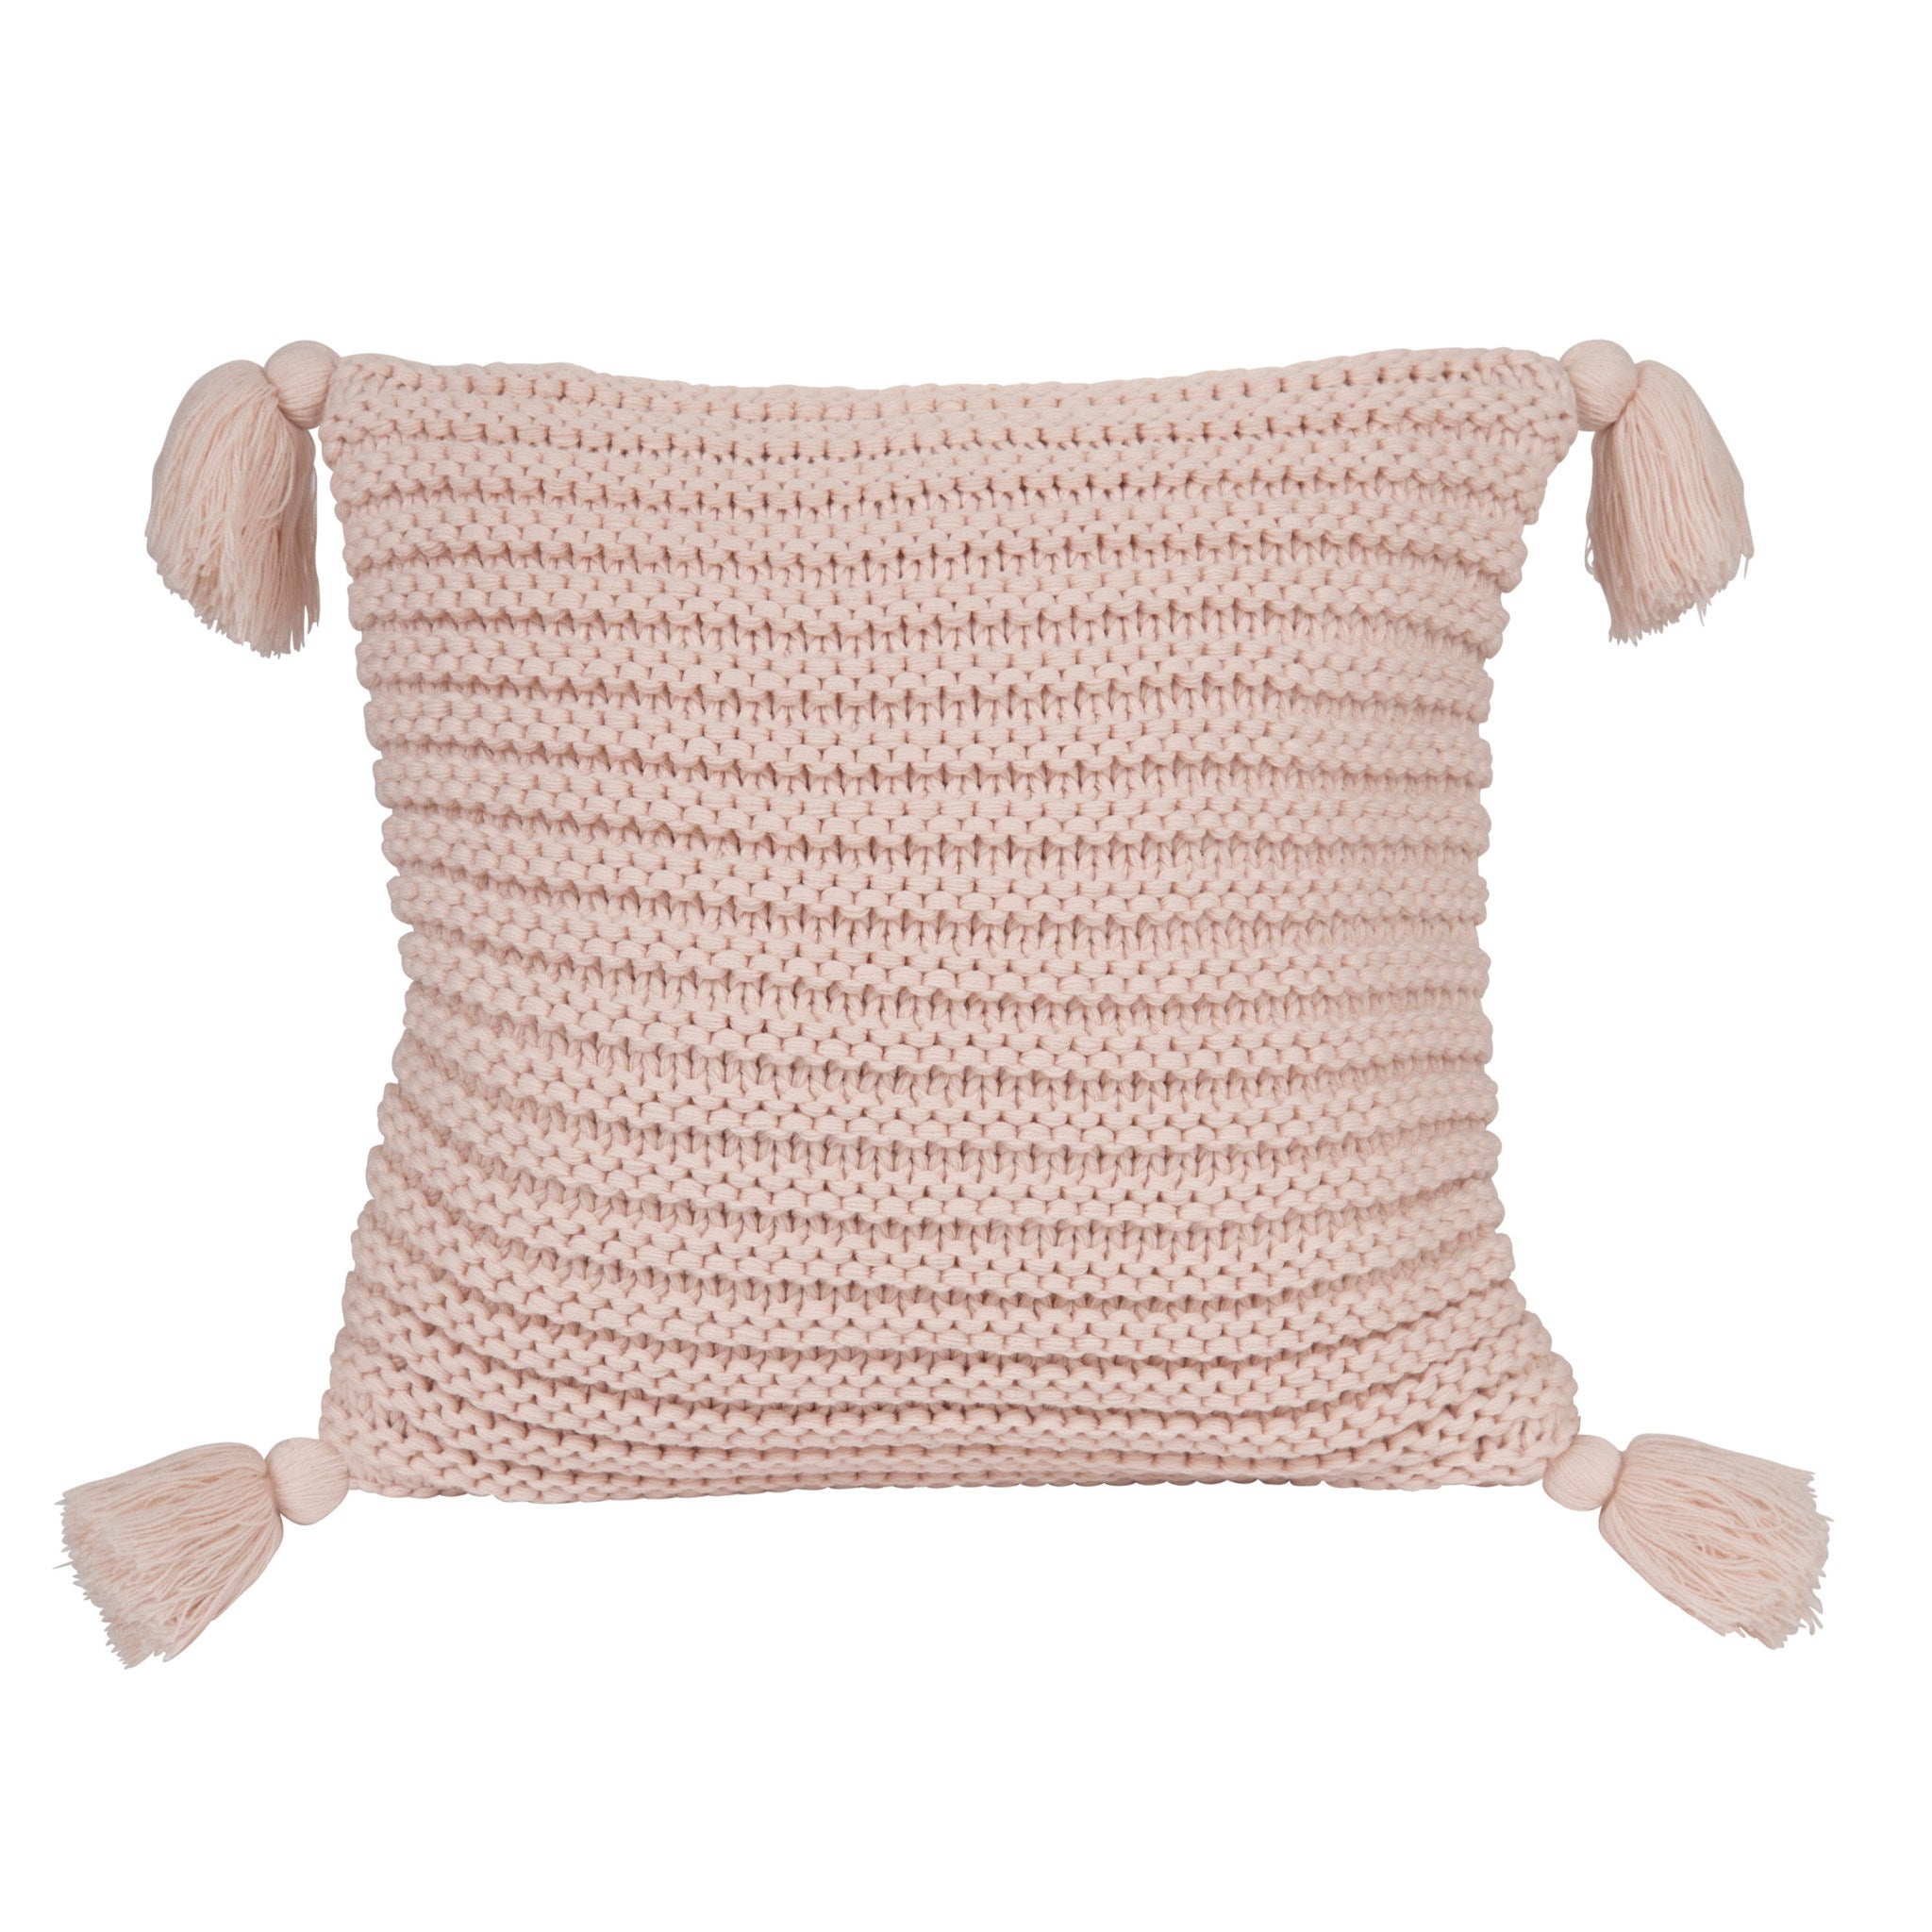 Tassey Large Knit Pillow Cover with Tassels